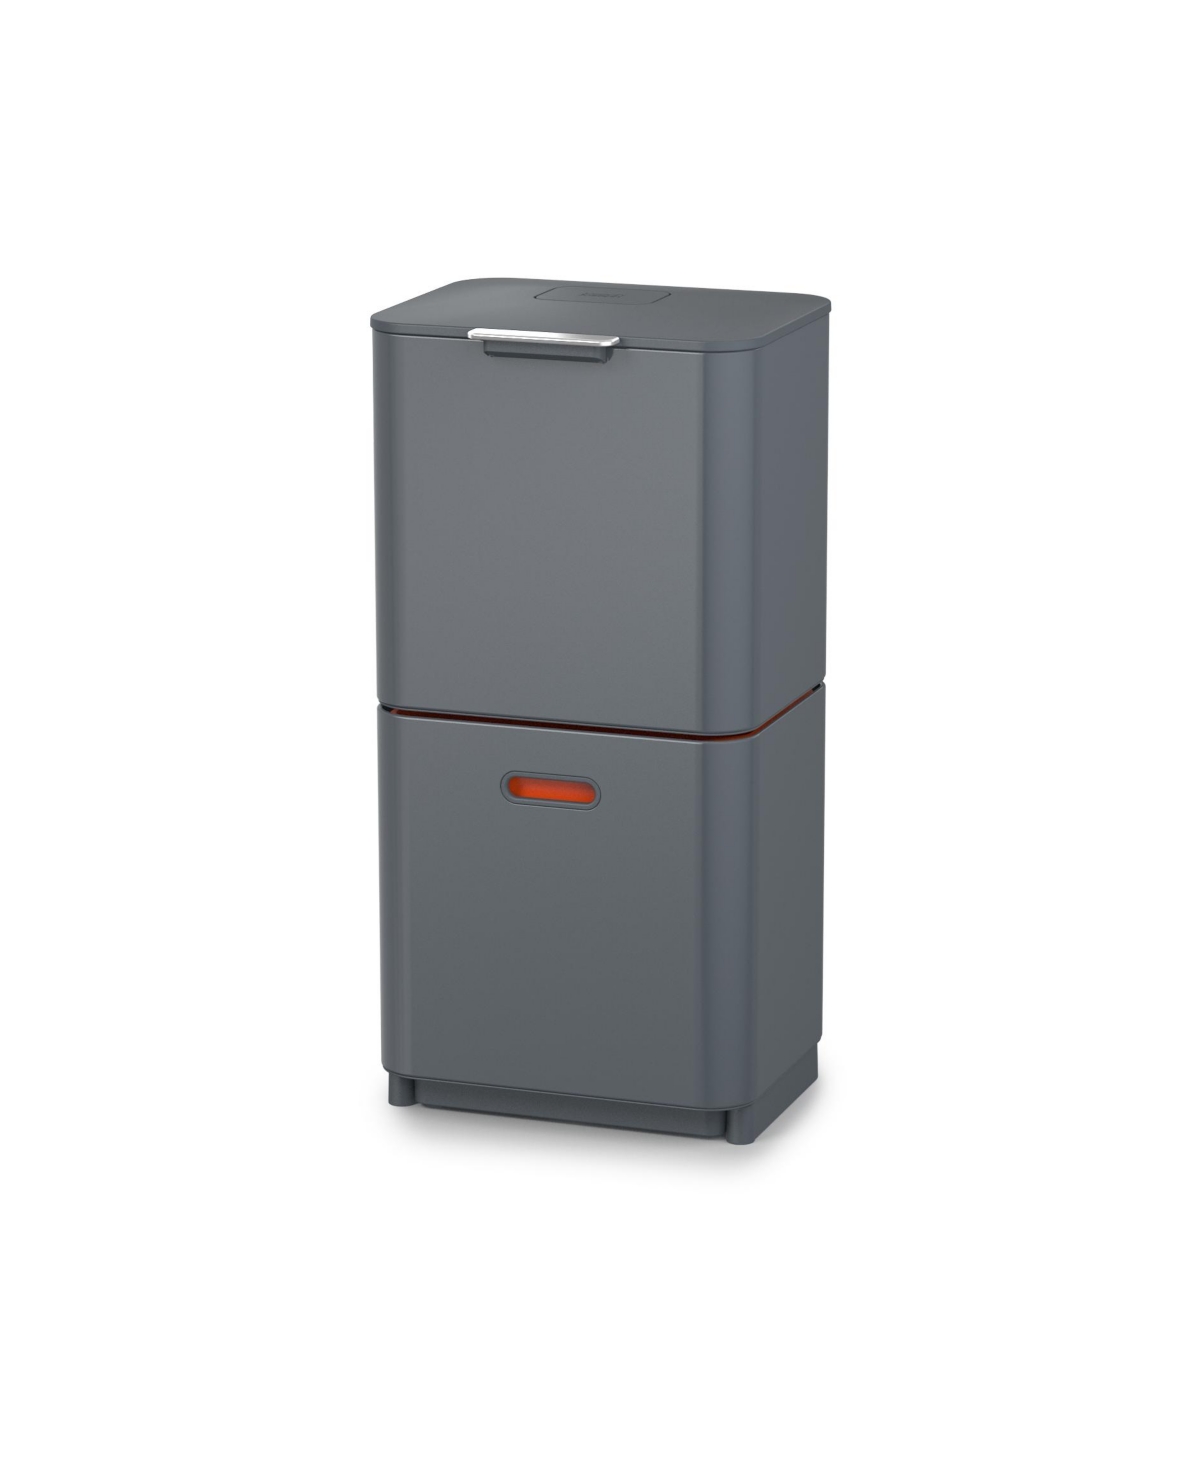 Totem Max 60L Waste Separation & Recycling Unit - Graphite